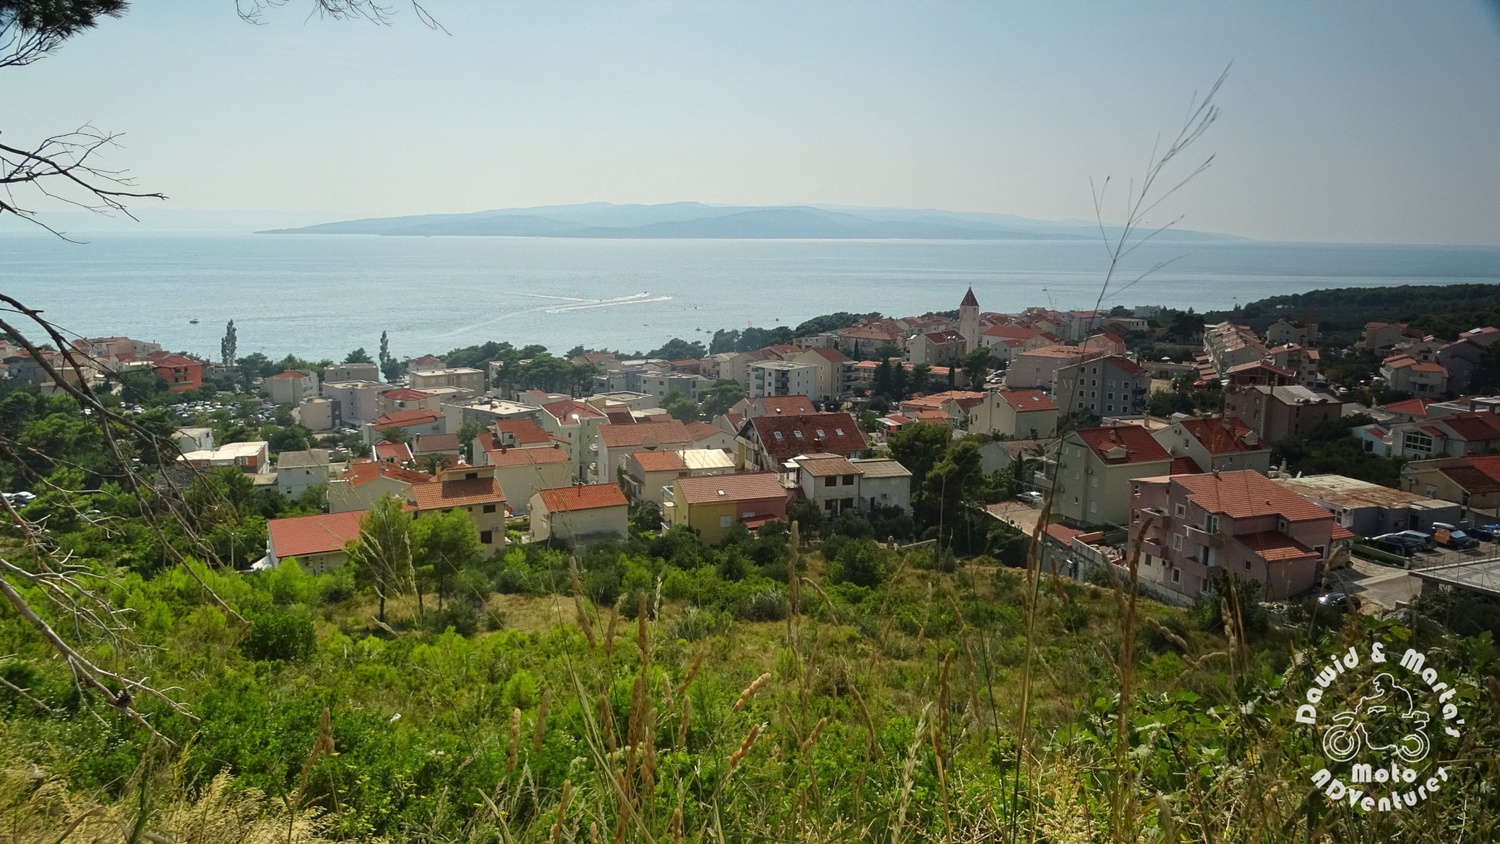 Promajna seen from the Adriatic Highway